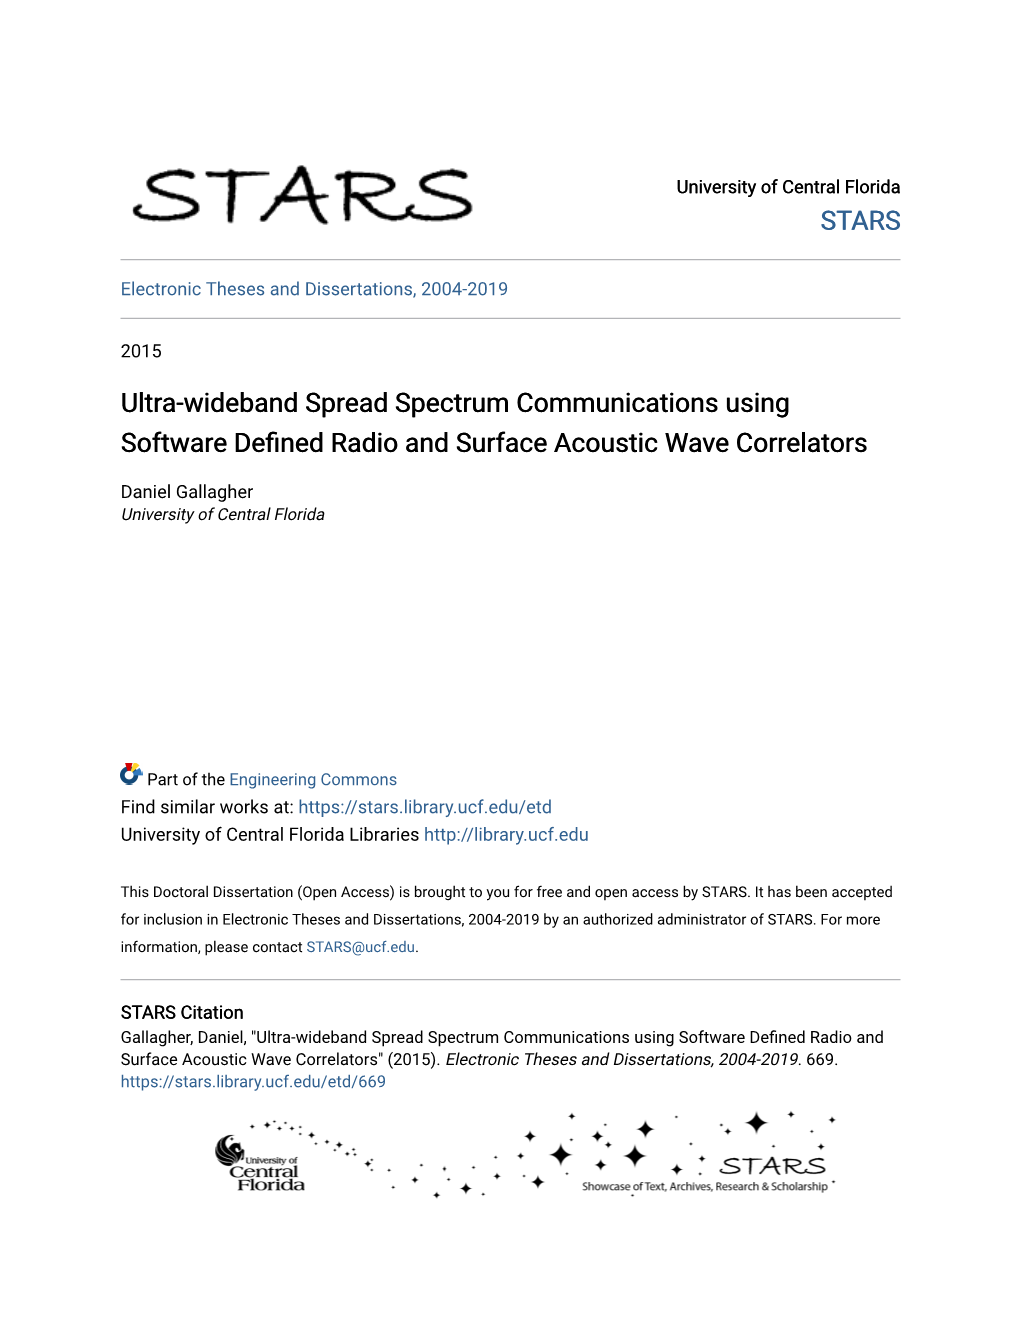 Ultra-Wideband Spread Spectrum Communications Using Software Defined Radio and Surface Acoustic Wave Correlators